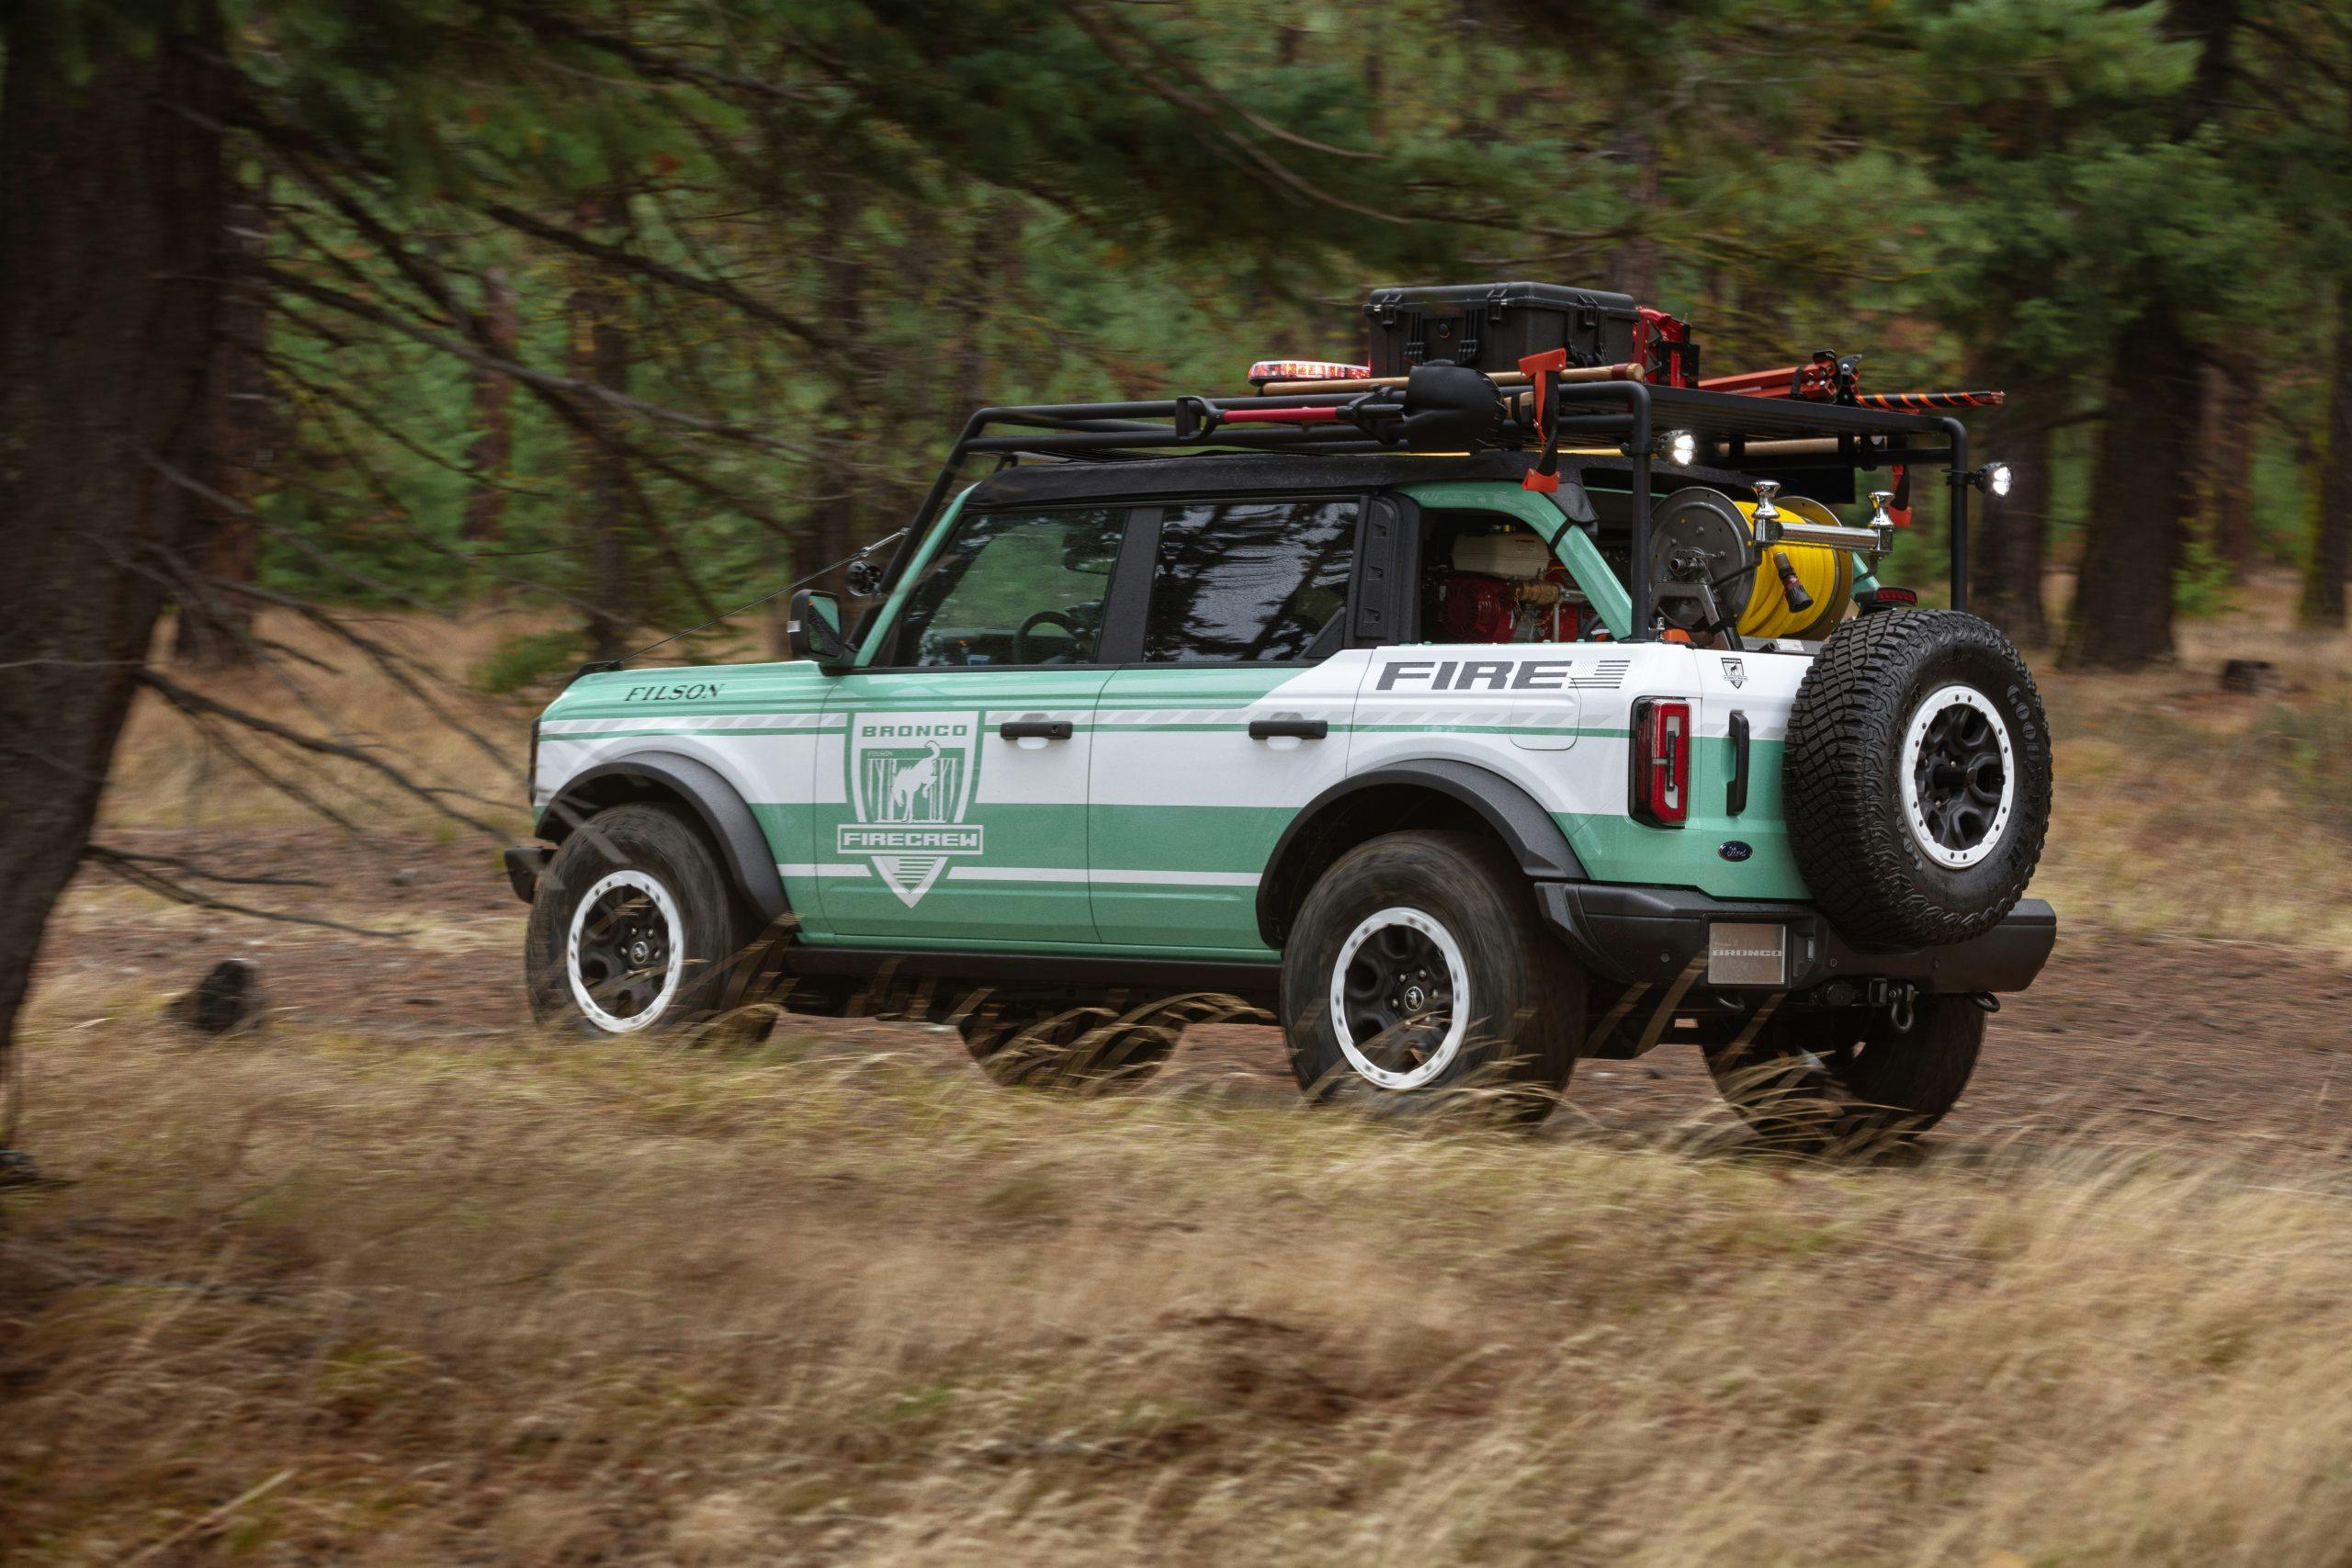 Bronco + Filson Wildland Fire Rig Concept driving in woods